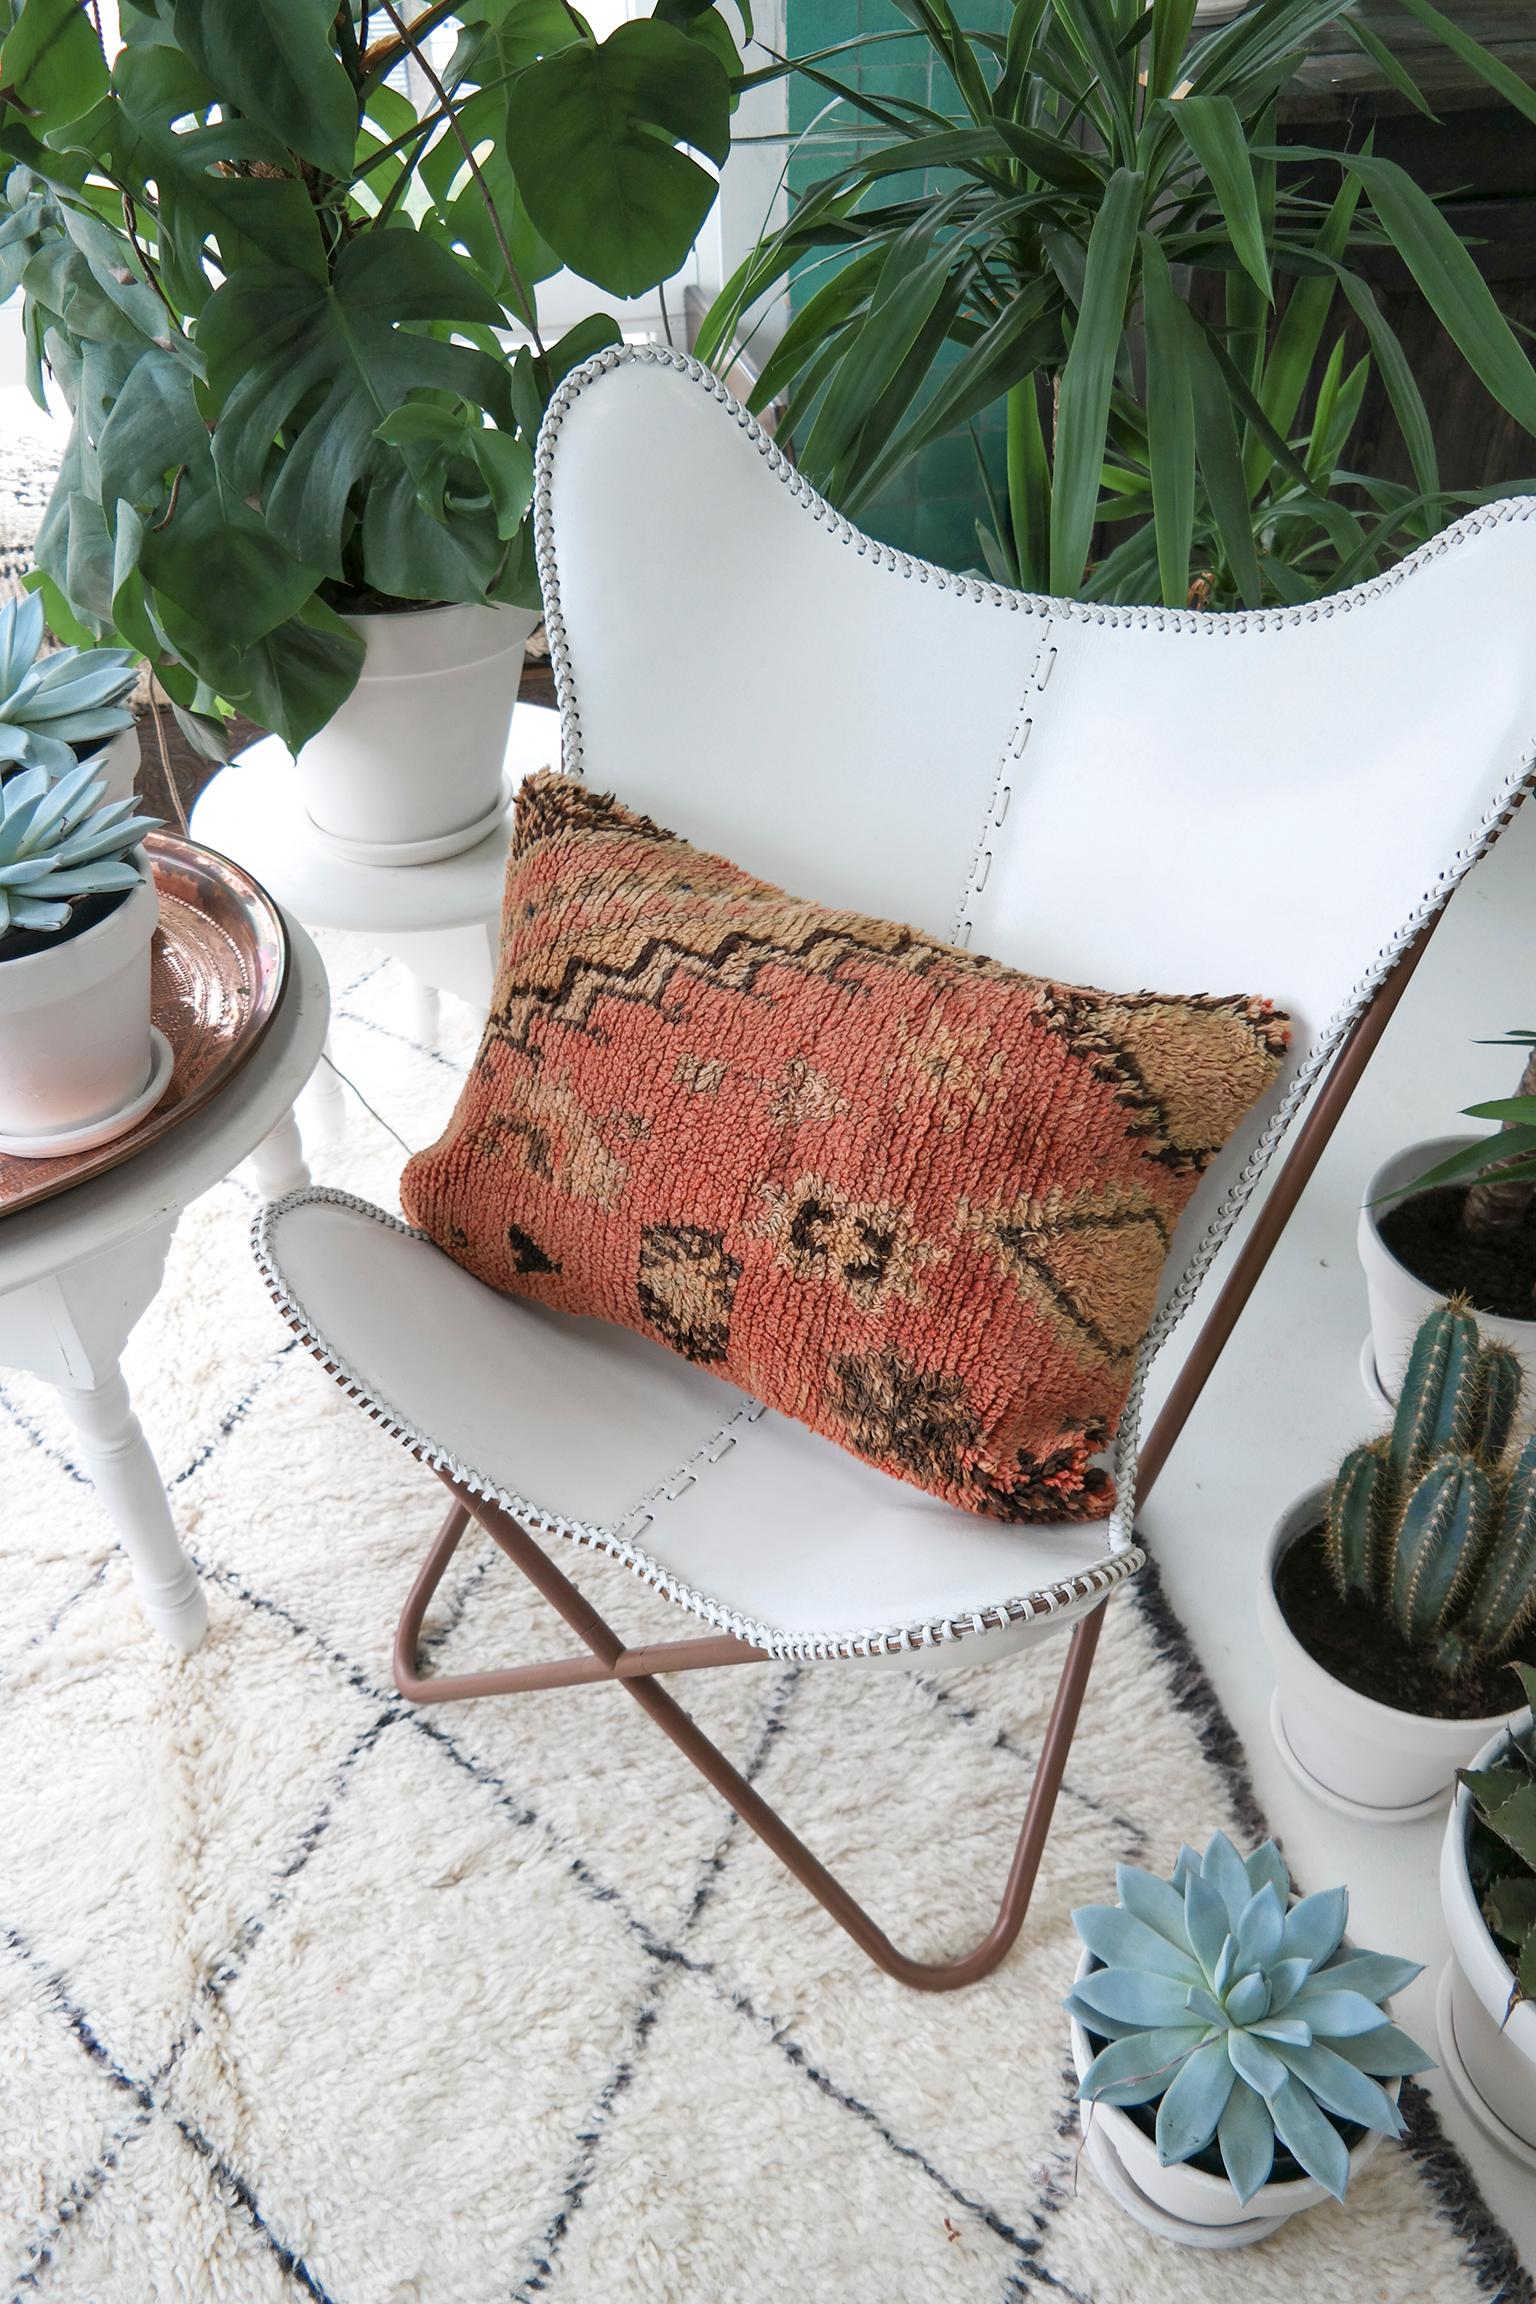 Cushion custom-made from a more than 40 years old Moroccan rug, searched and selected by ourselves. This pillow is a one-of-a-kind with beautiful deep warm colors. The beauty of our pillows is that they are timeless and blend in every interior. Or